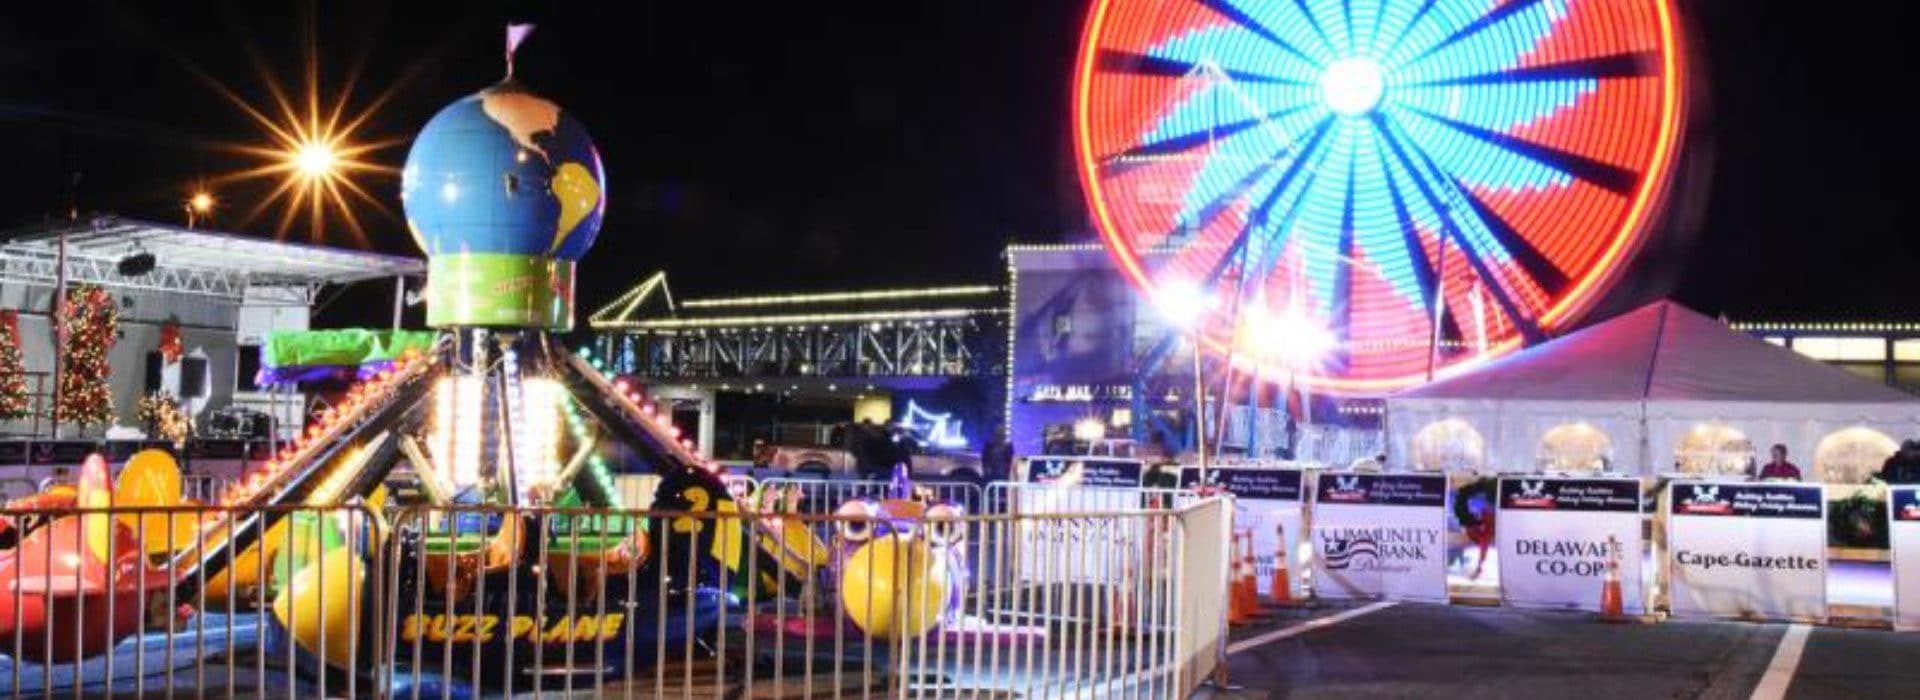 rides at the winter fest